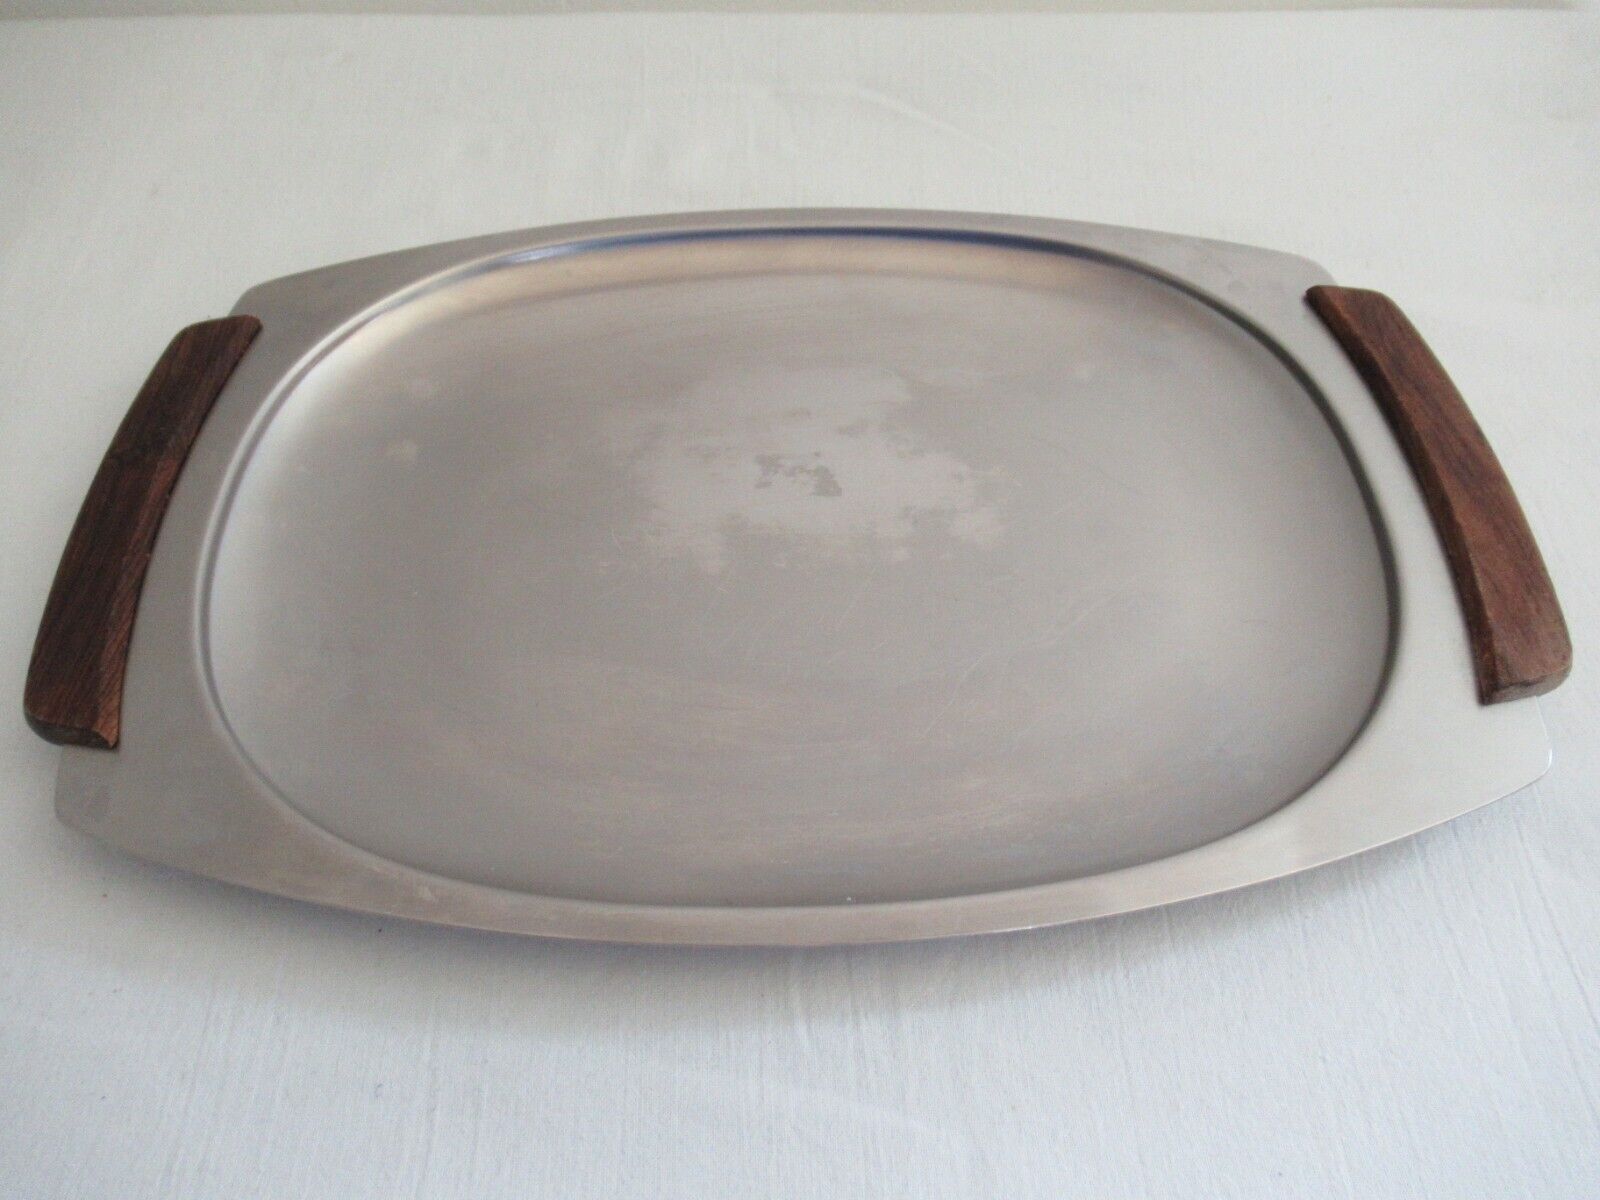 Vintage danish stainless steel serving dishes with rosewood handles